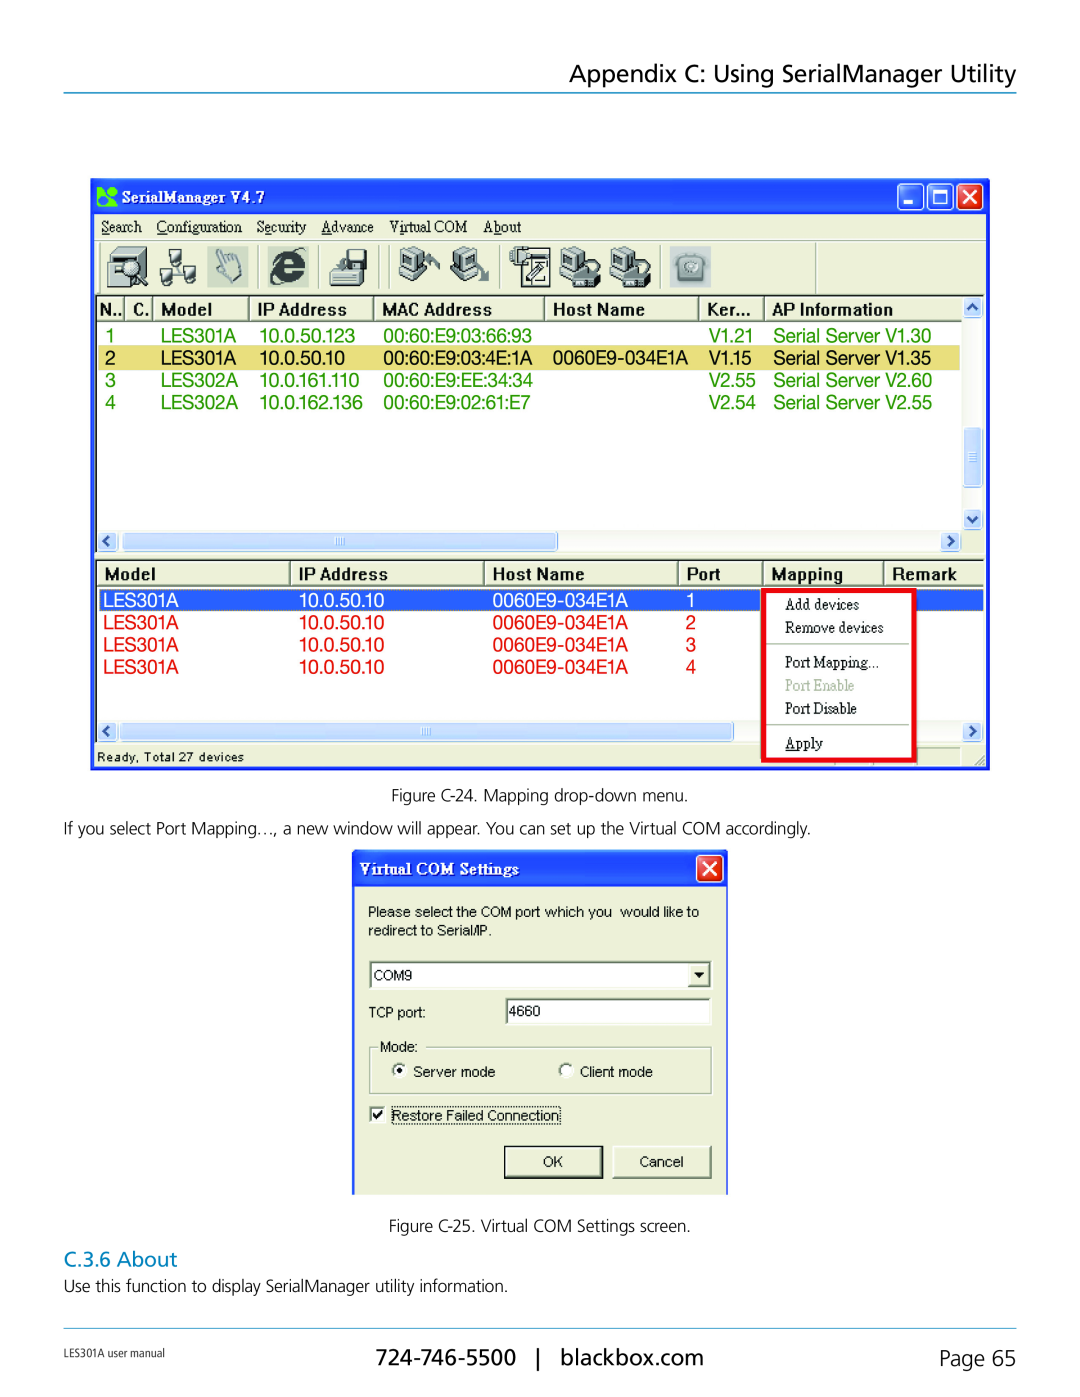 Black Box RS-232, RS-422 Appendix C Using SerialManager Utility, C.3.6 About, Page, Figure C-24. Mapping drop-down menu 